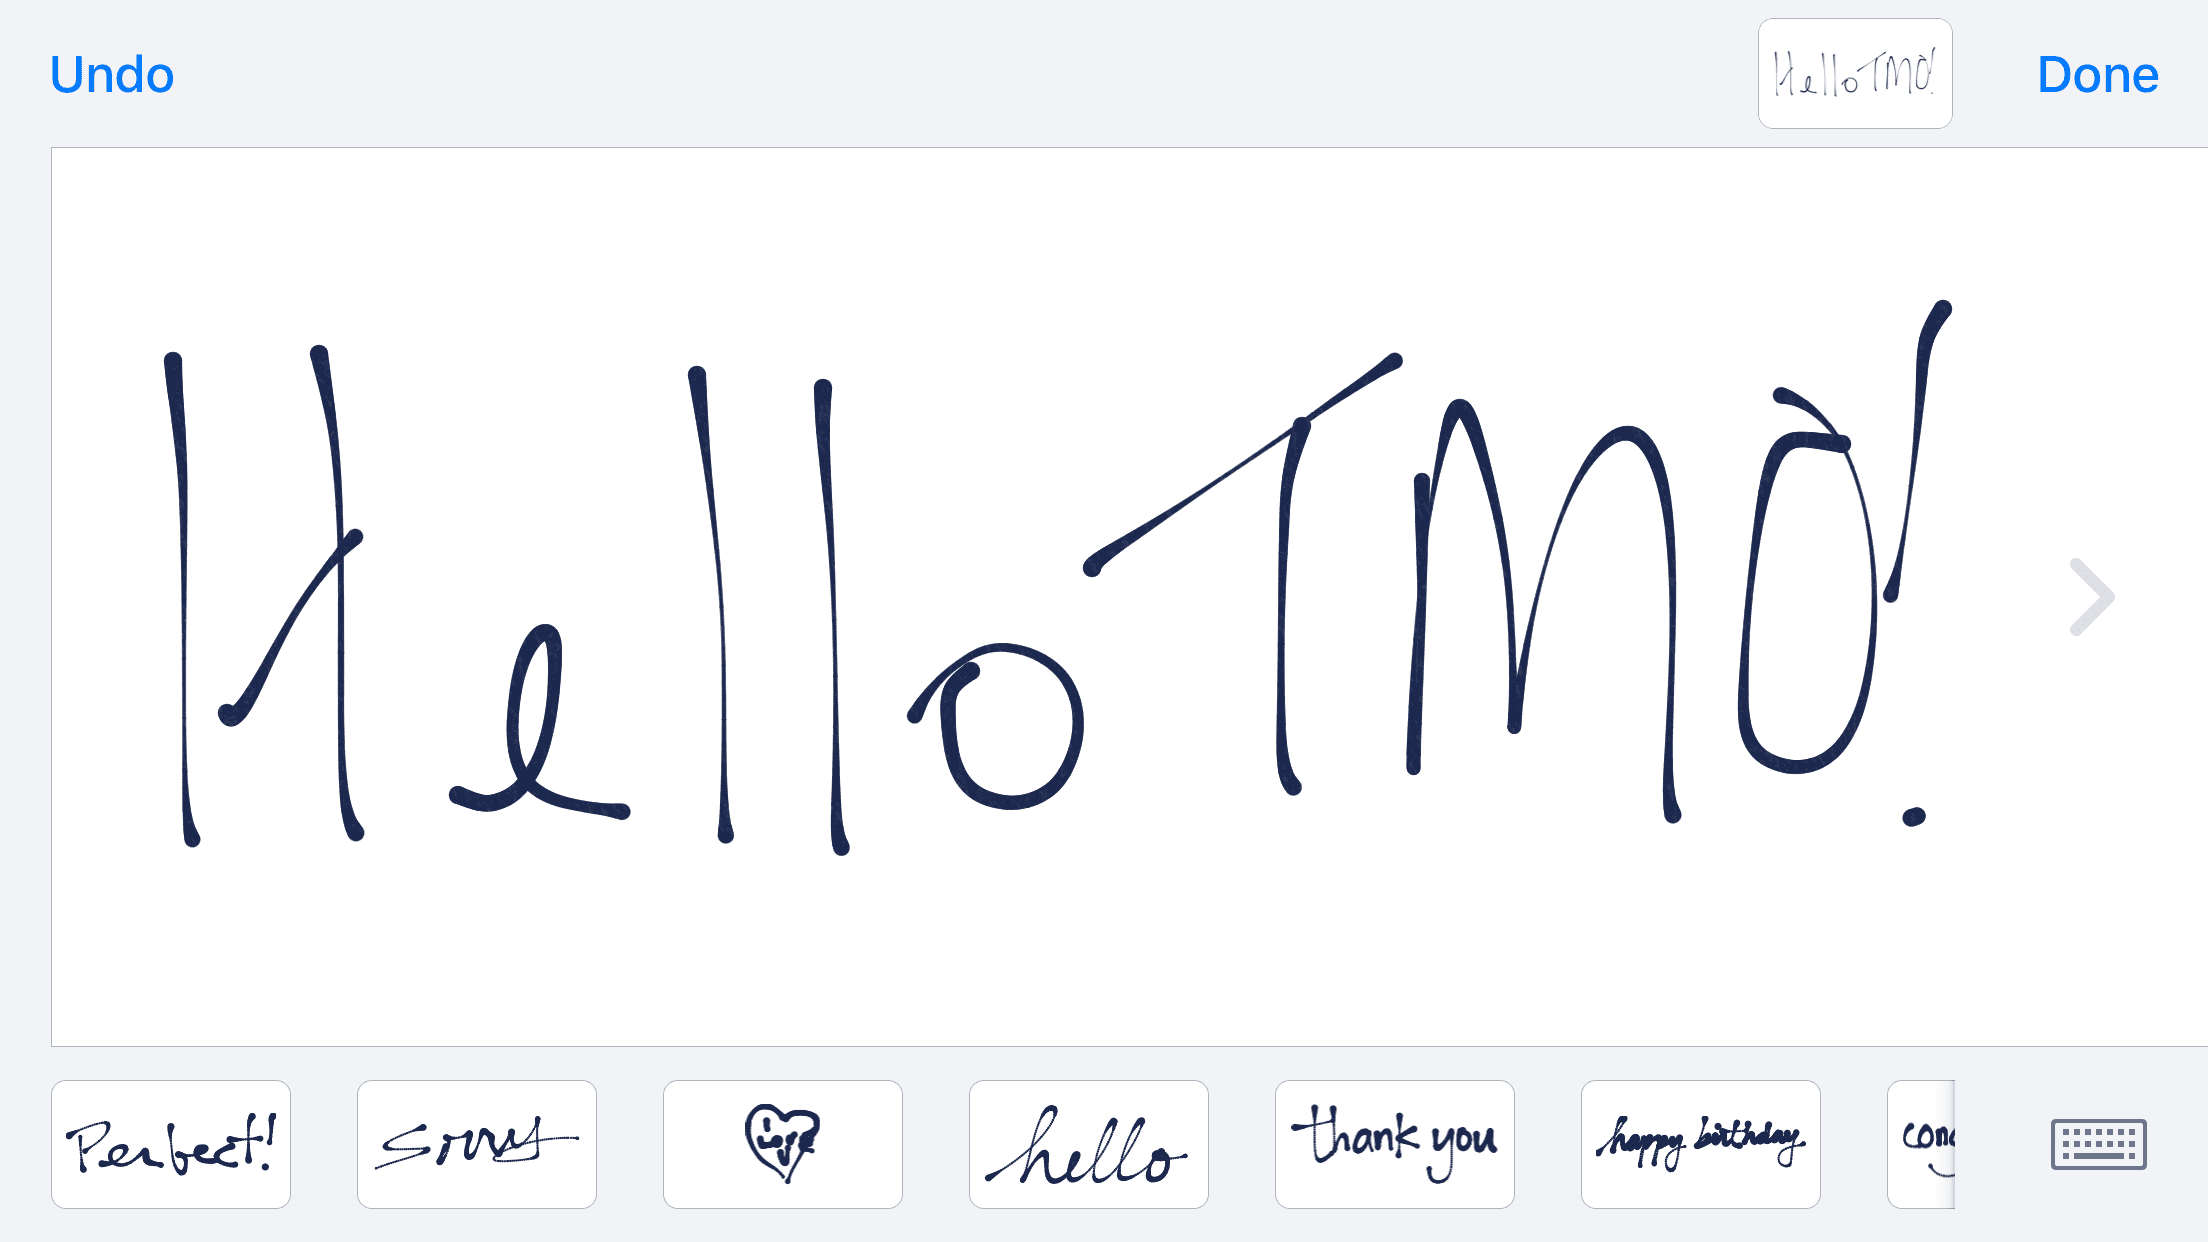 Turn your phone sideways to handwrite a message.